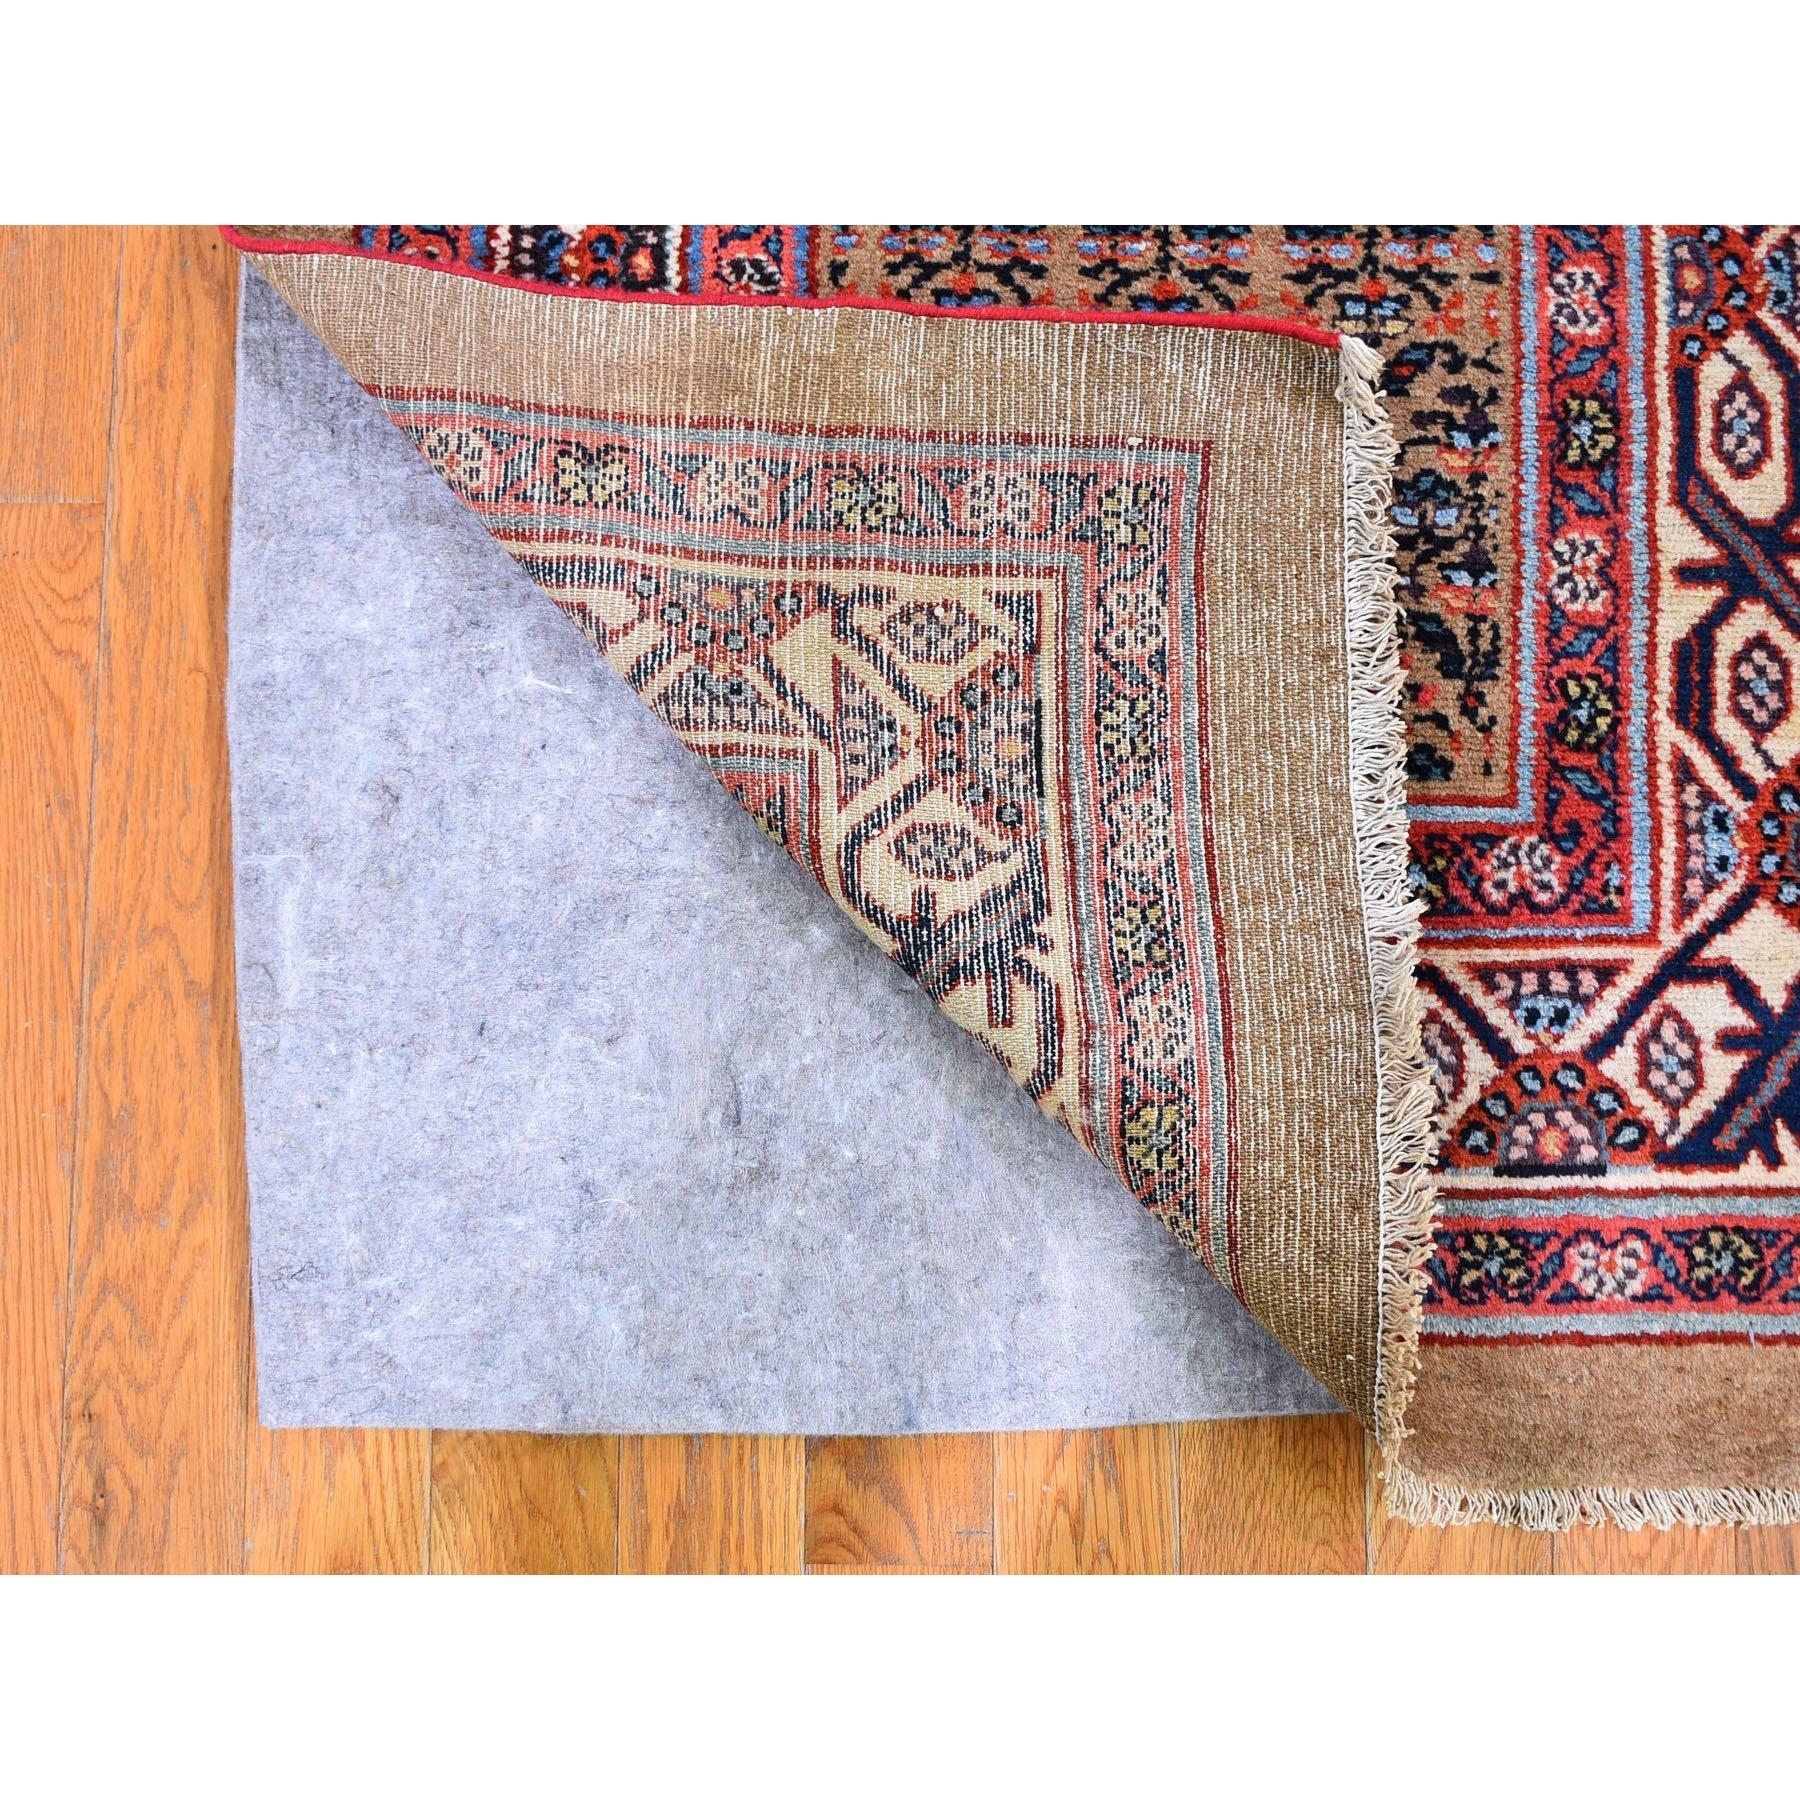 Hand-Knotted Antique Persian Serab Camel Hair Full Pile Exc Cond Handmade Wool XL Runner Rug For Sale